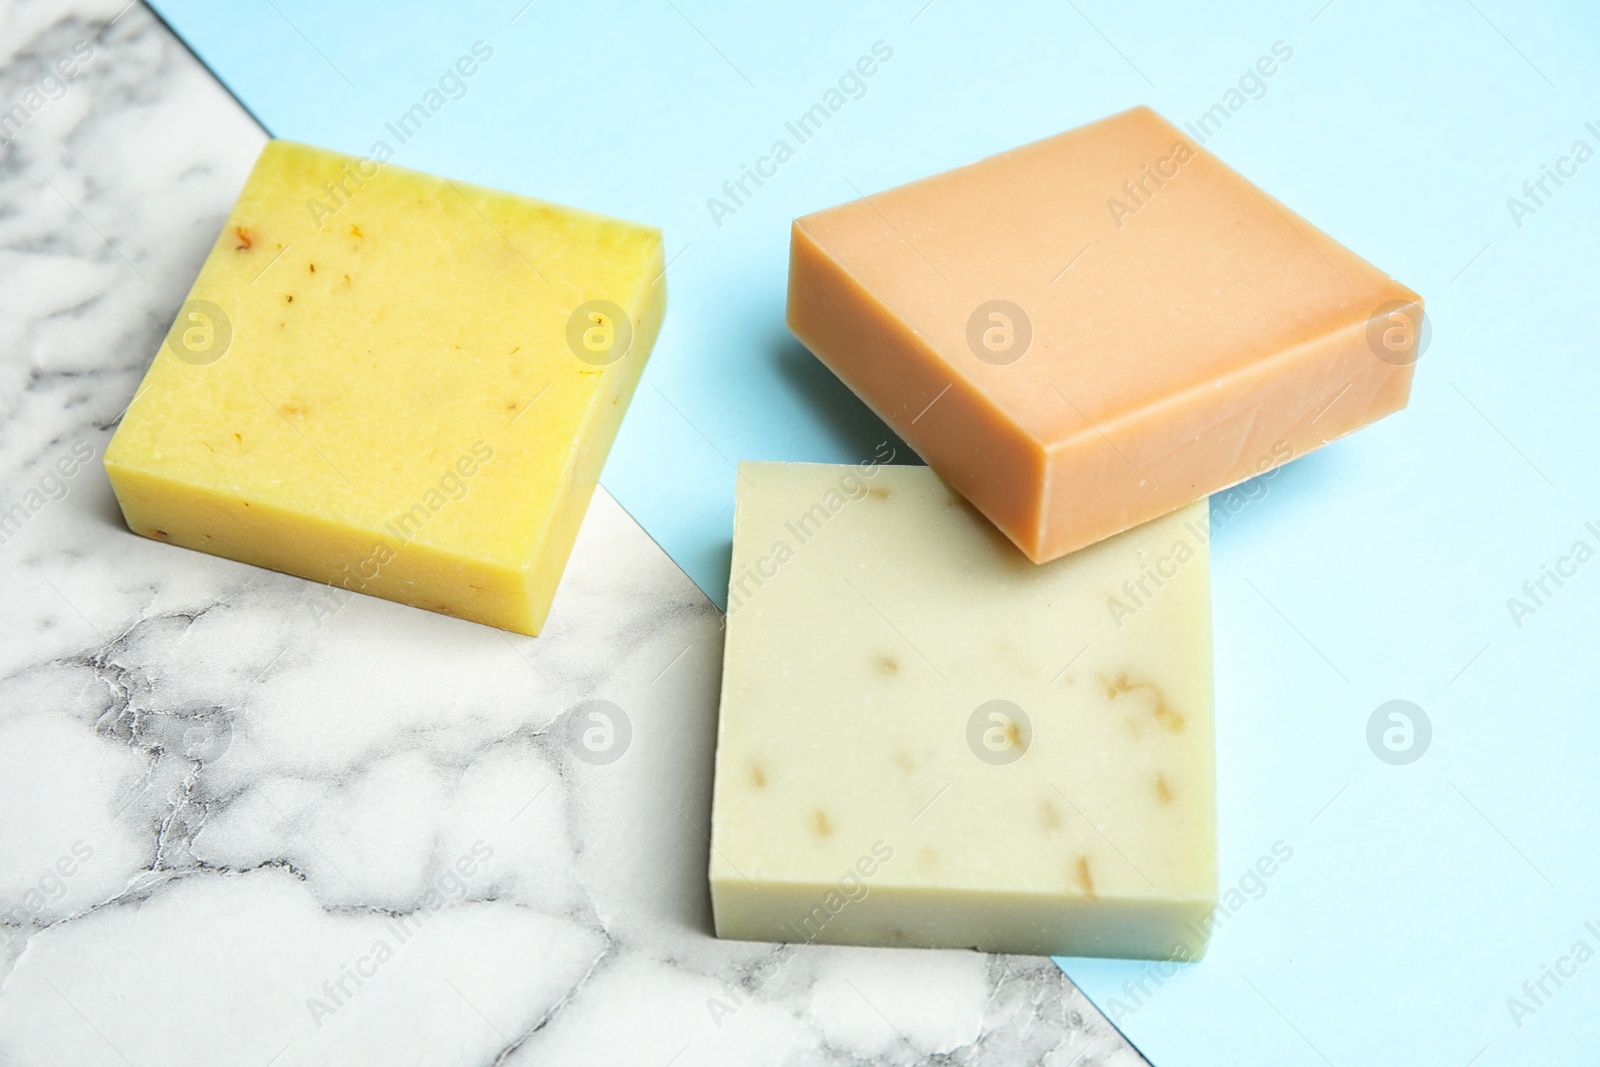 Photo of Different handmade soap bars on marble table